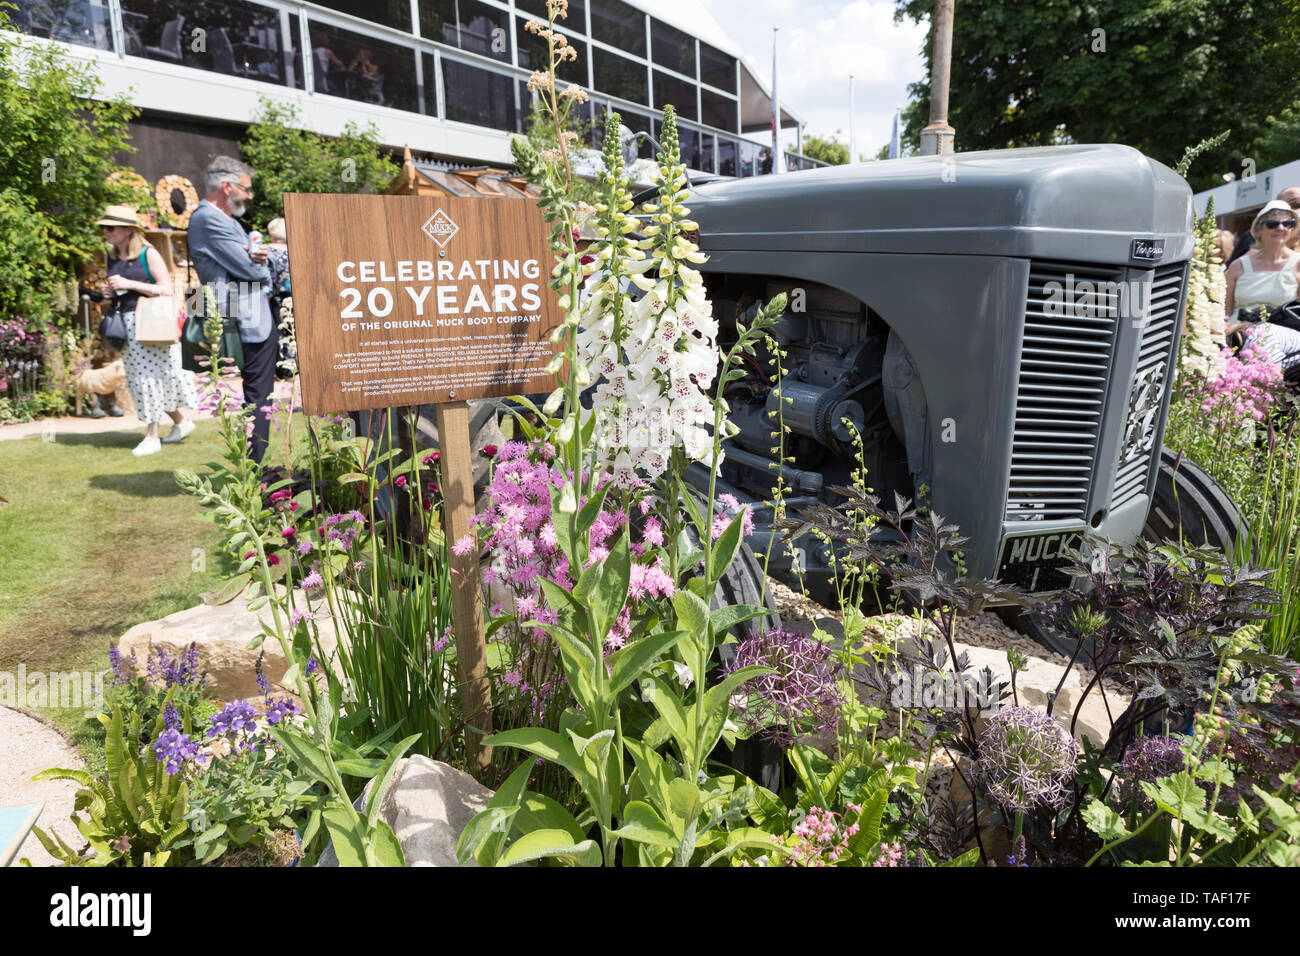 Muckboots add With Ferguson Tractor Chelsea Flower Show 2019 London Stock Photo